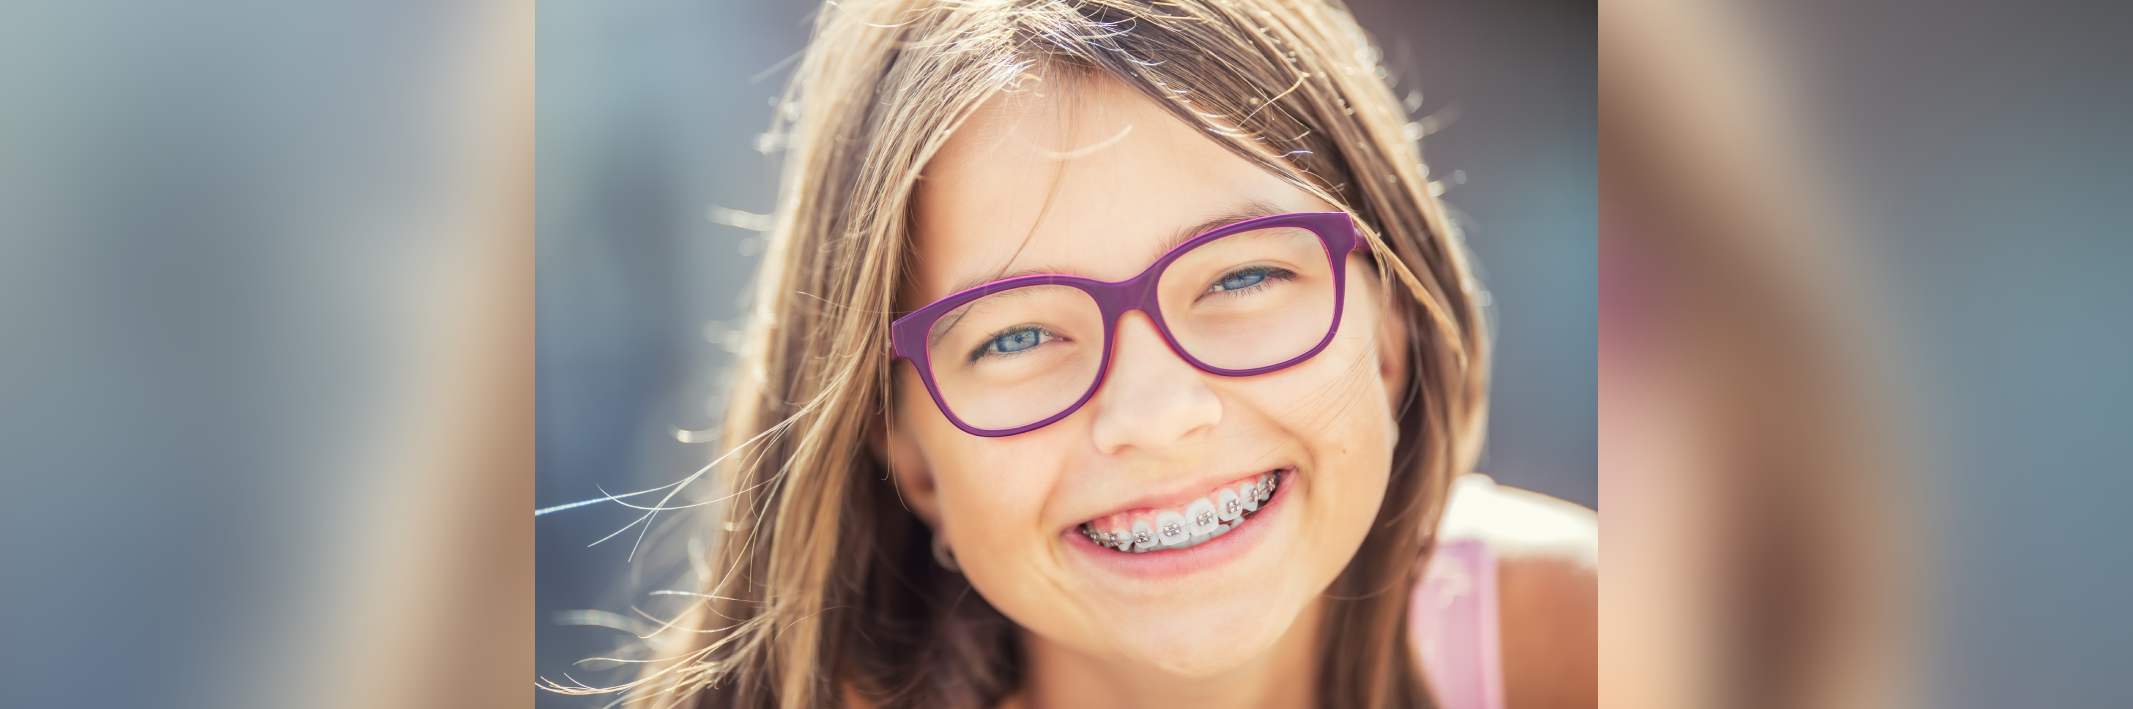 Caring For Teeth While Wearing Braces